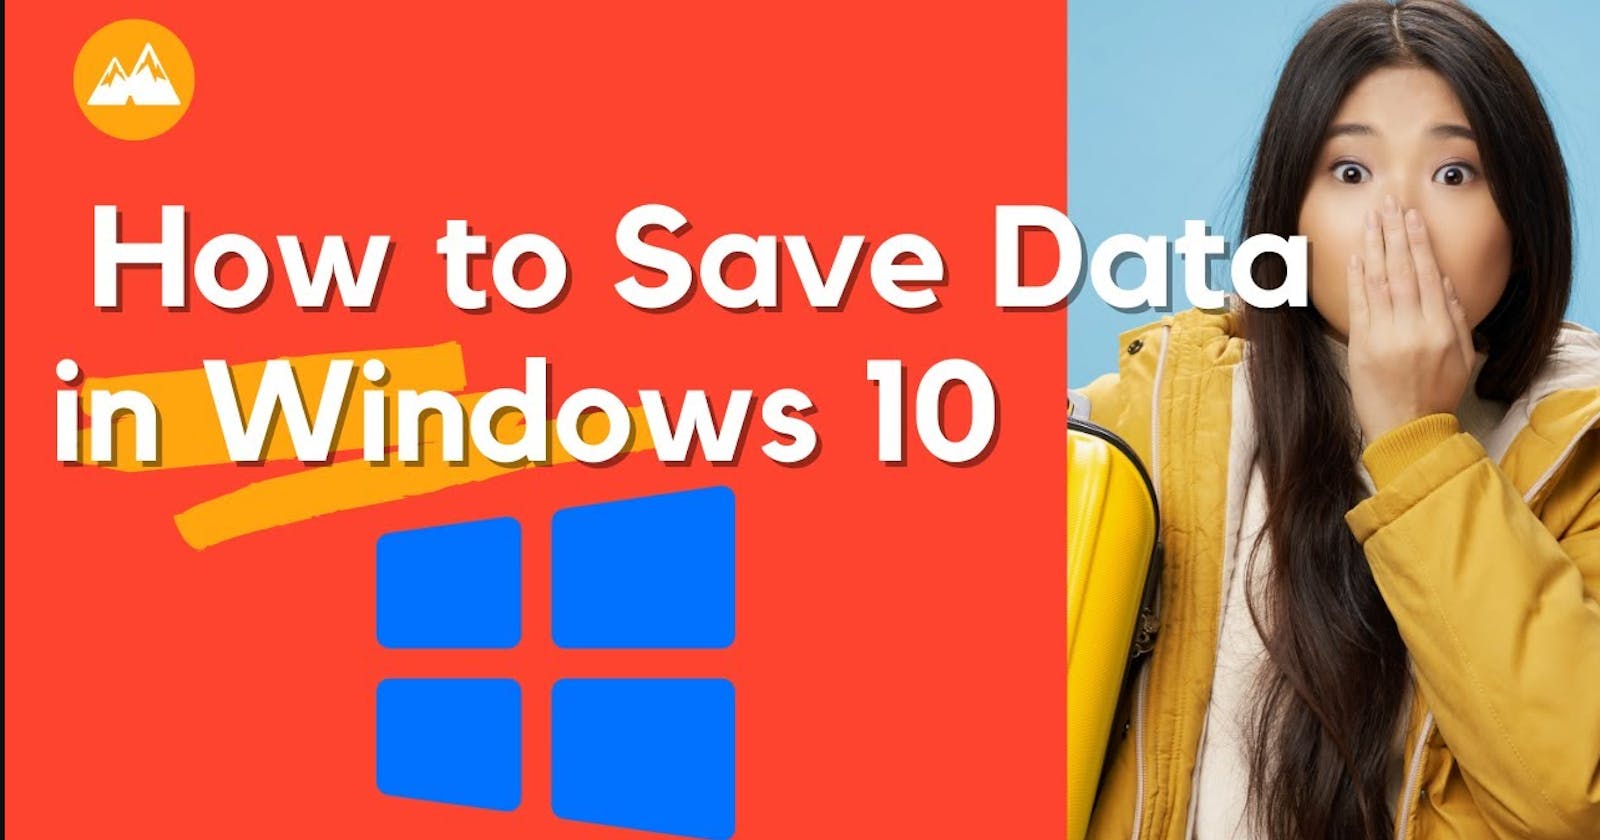 Windows10 has a little trick that lets you reduce your data usage. Here’s how it works